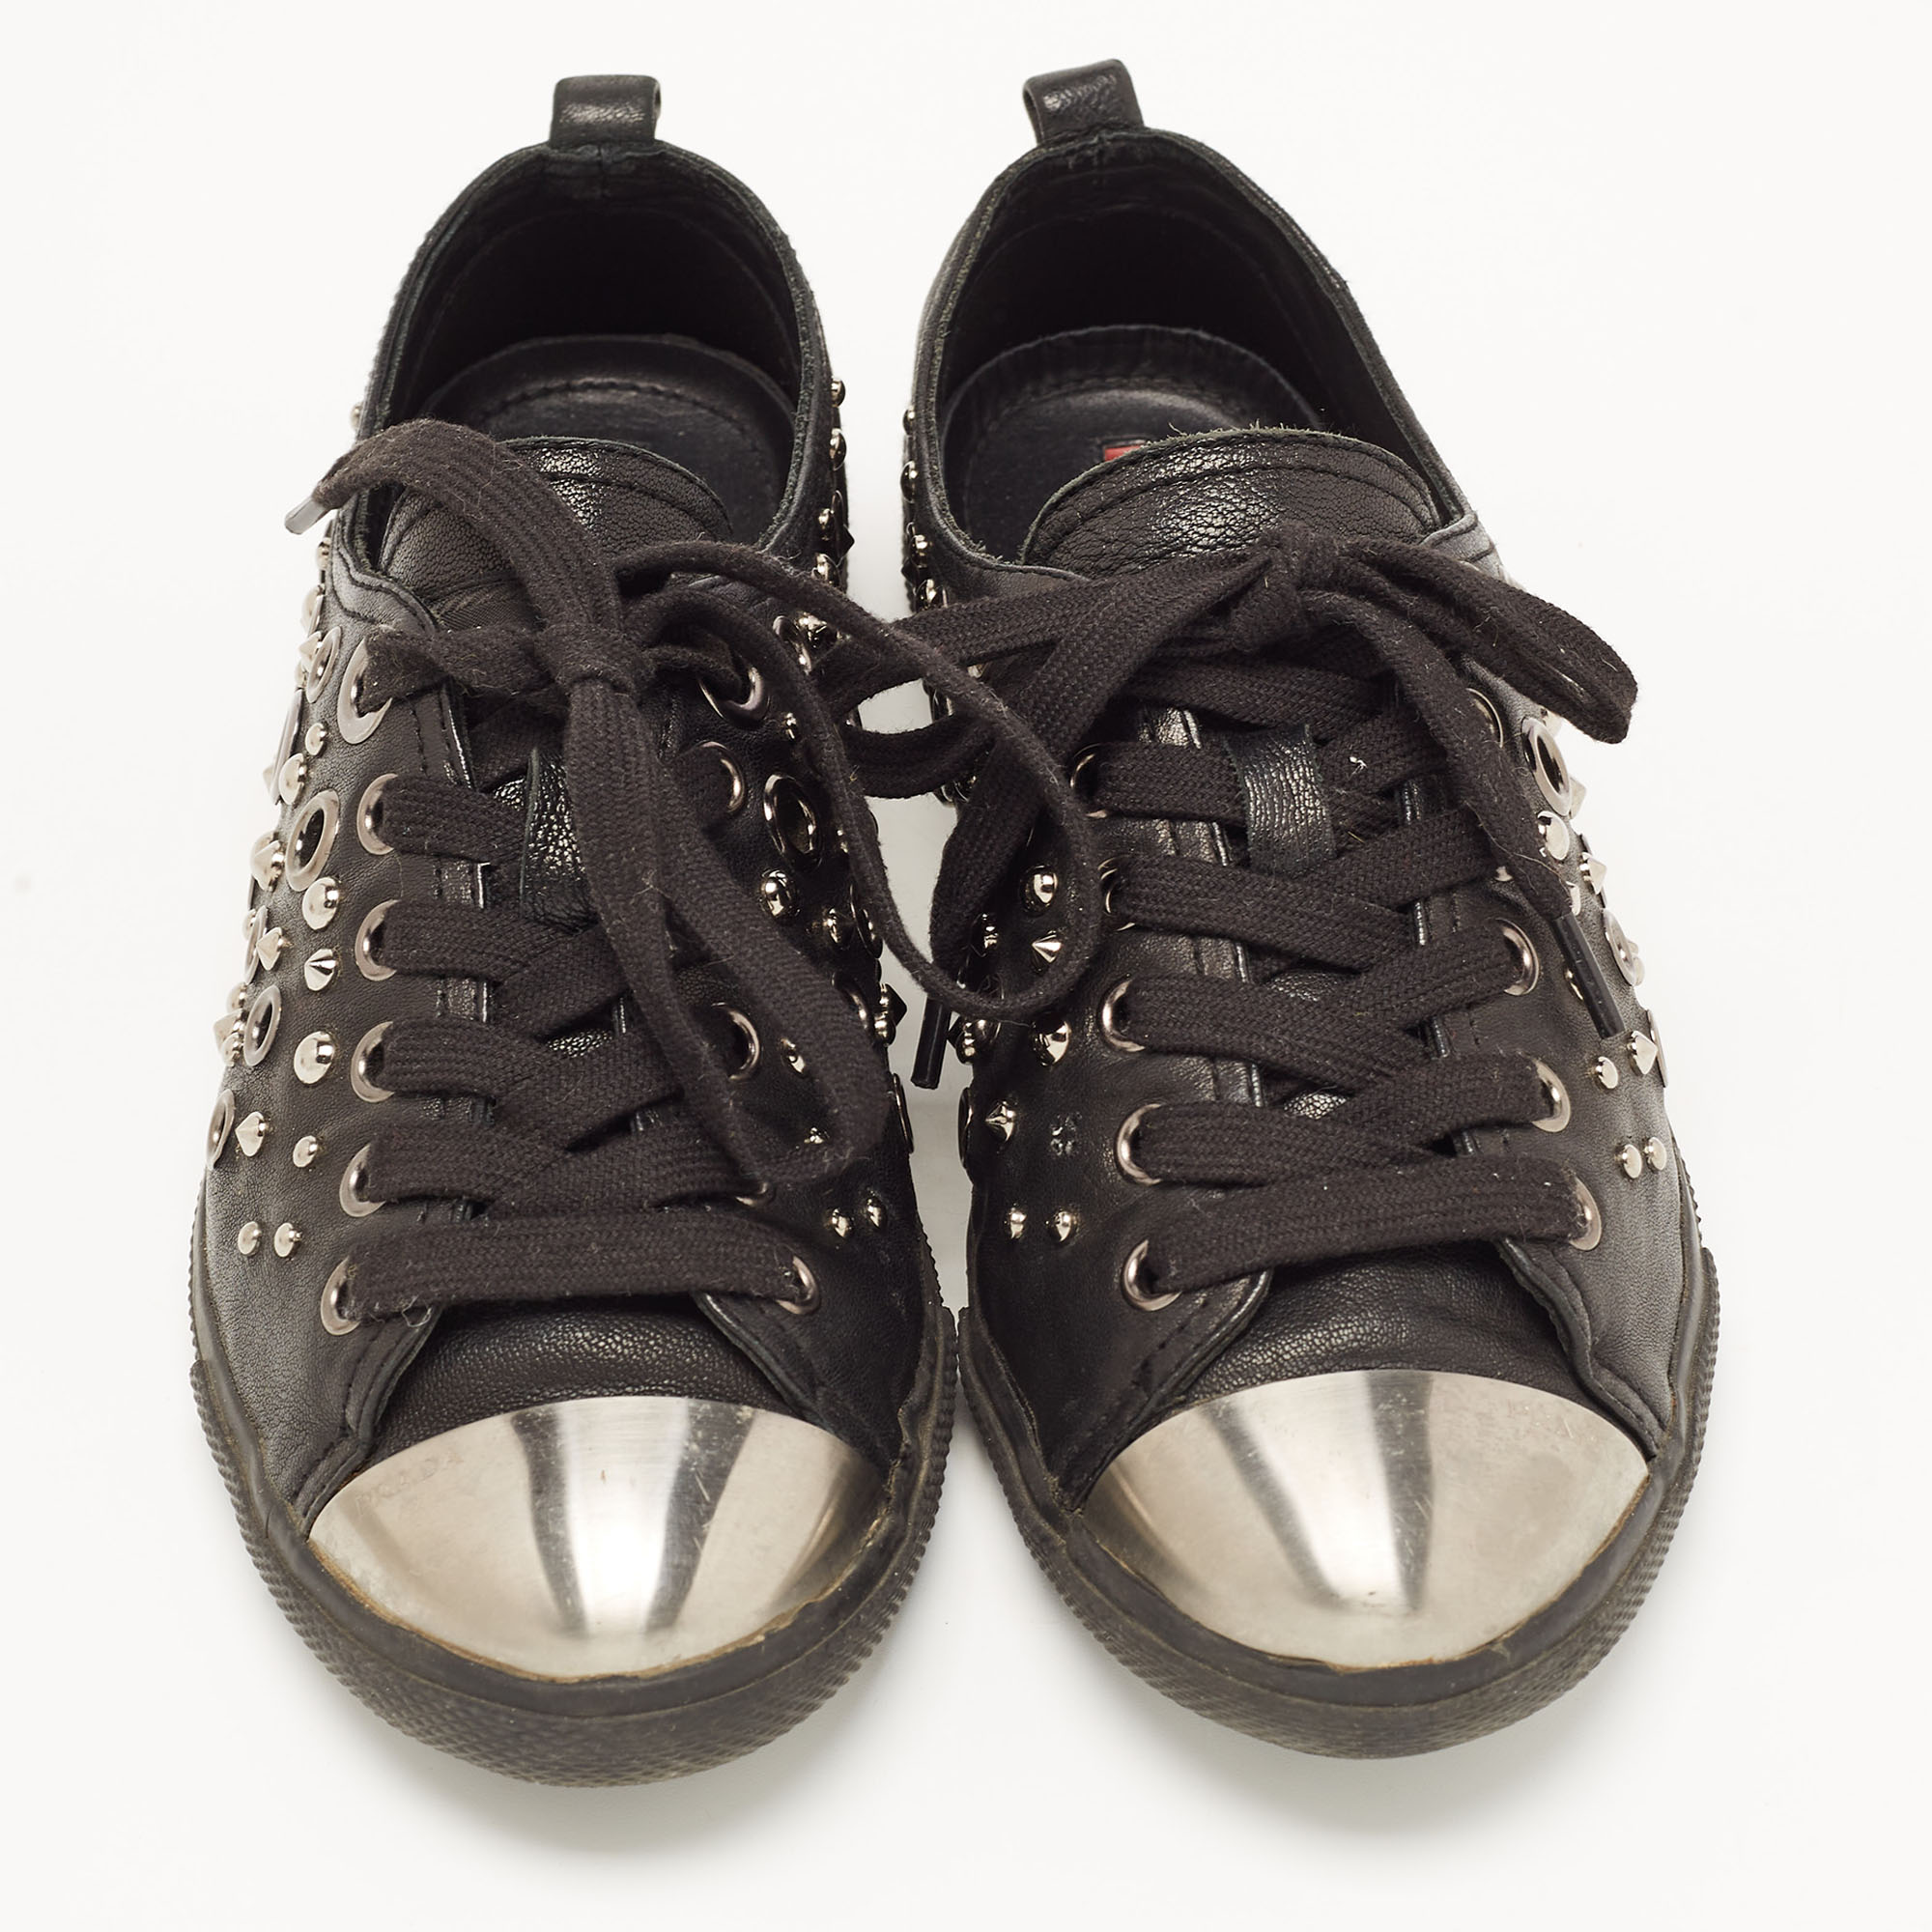 Prada Sport Black Leather Studded Low Top Sneakers Size 37